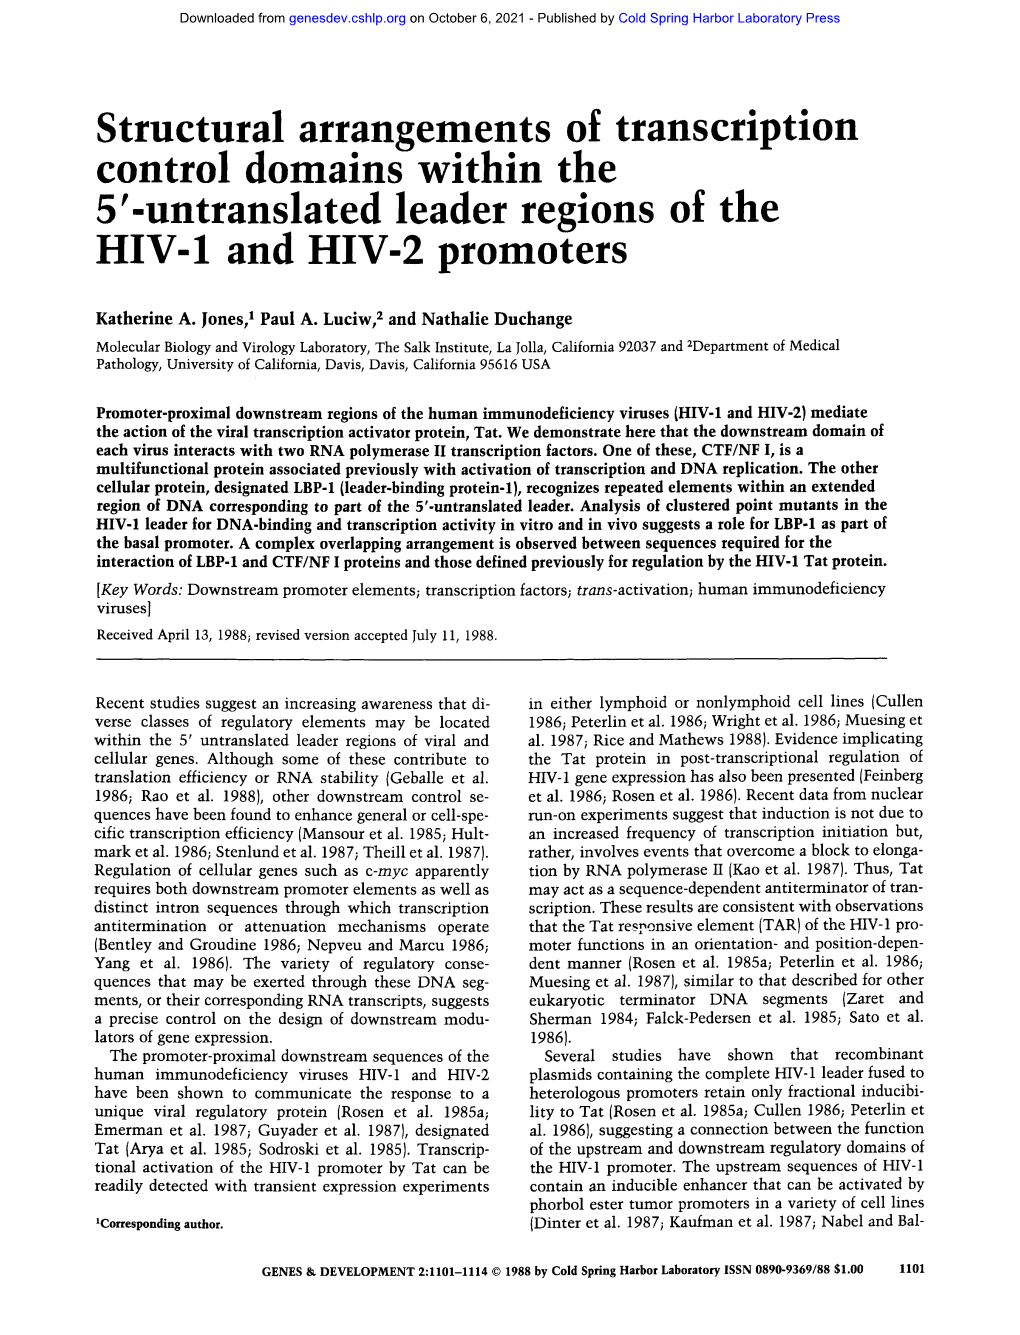 Untranslated Leader Regions of the HIV-1 and HIV-2 Promoters